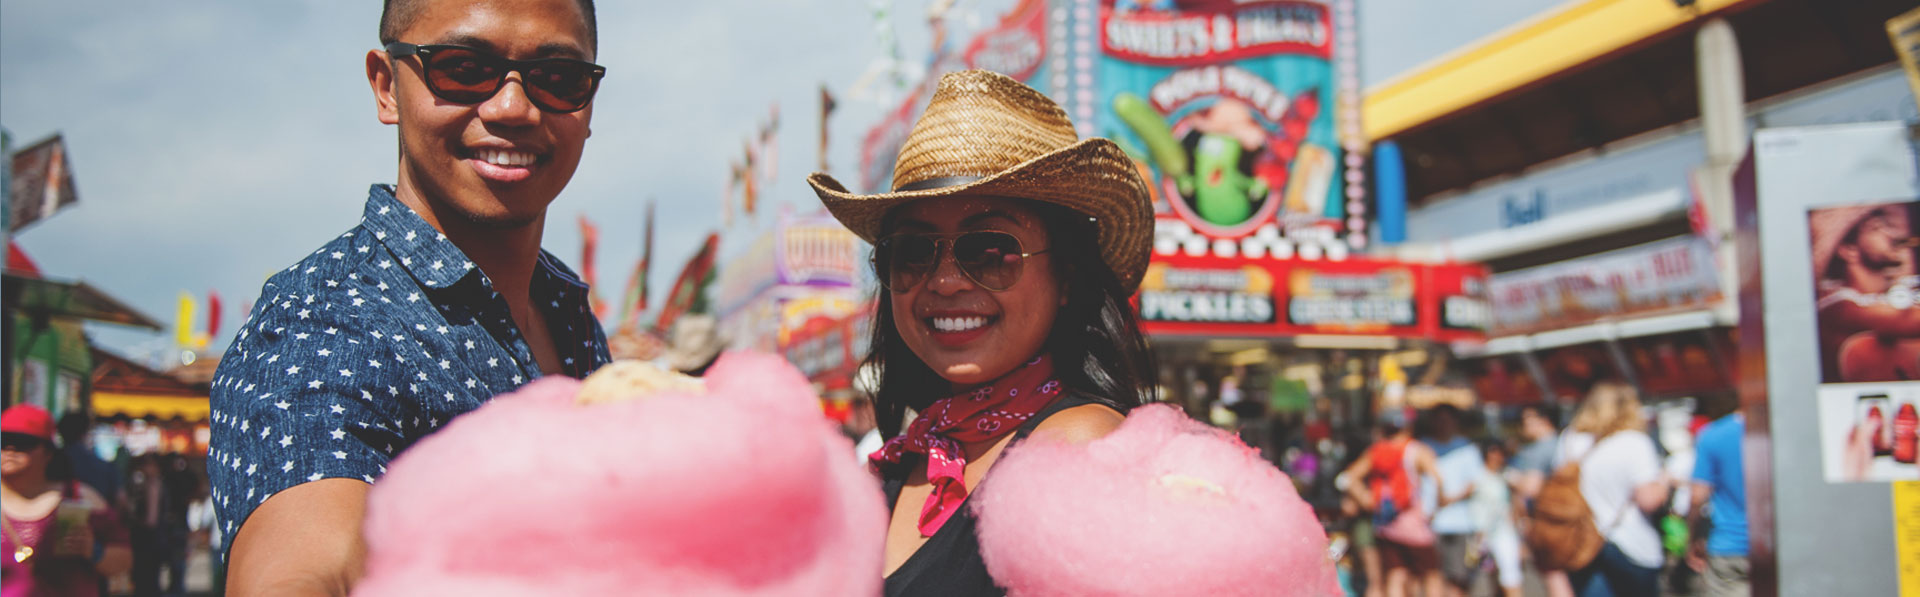 Couple enjoying cotton candy in the Calgary Stampede midway